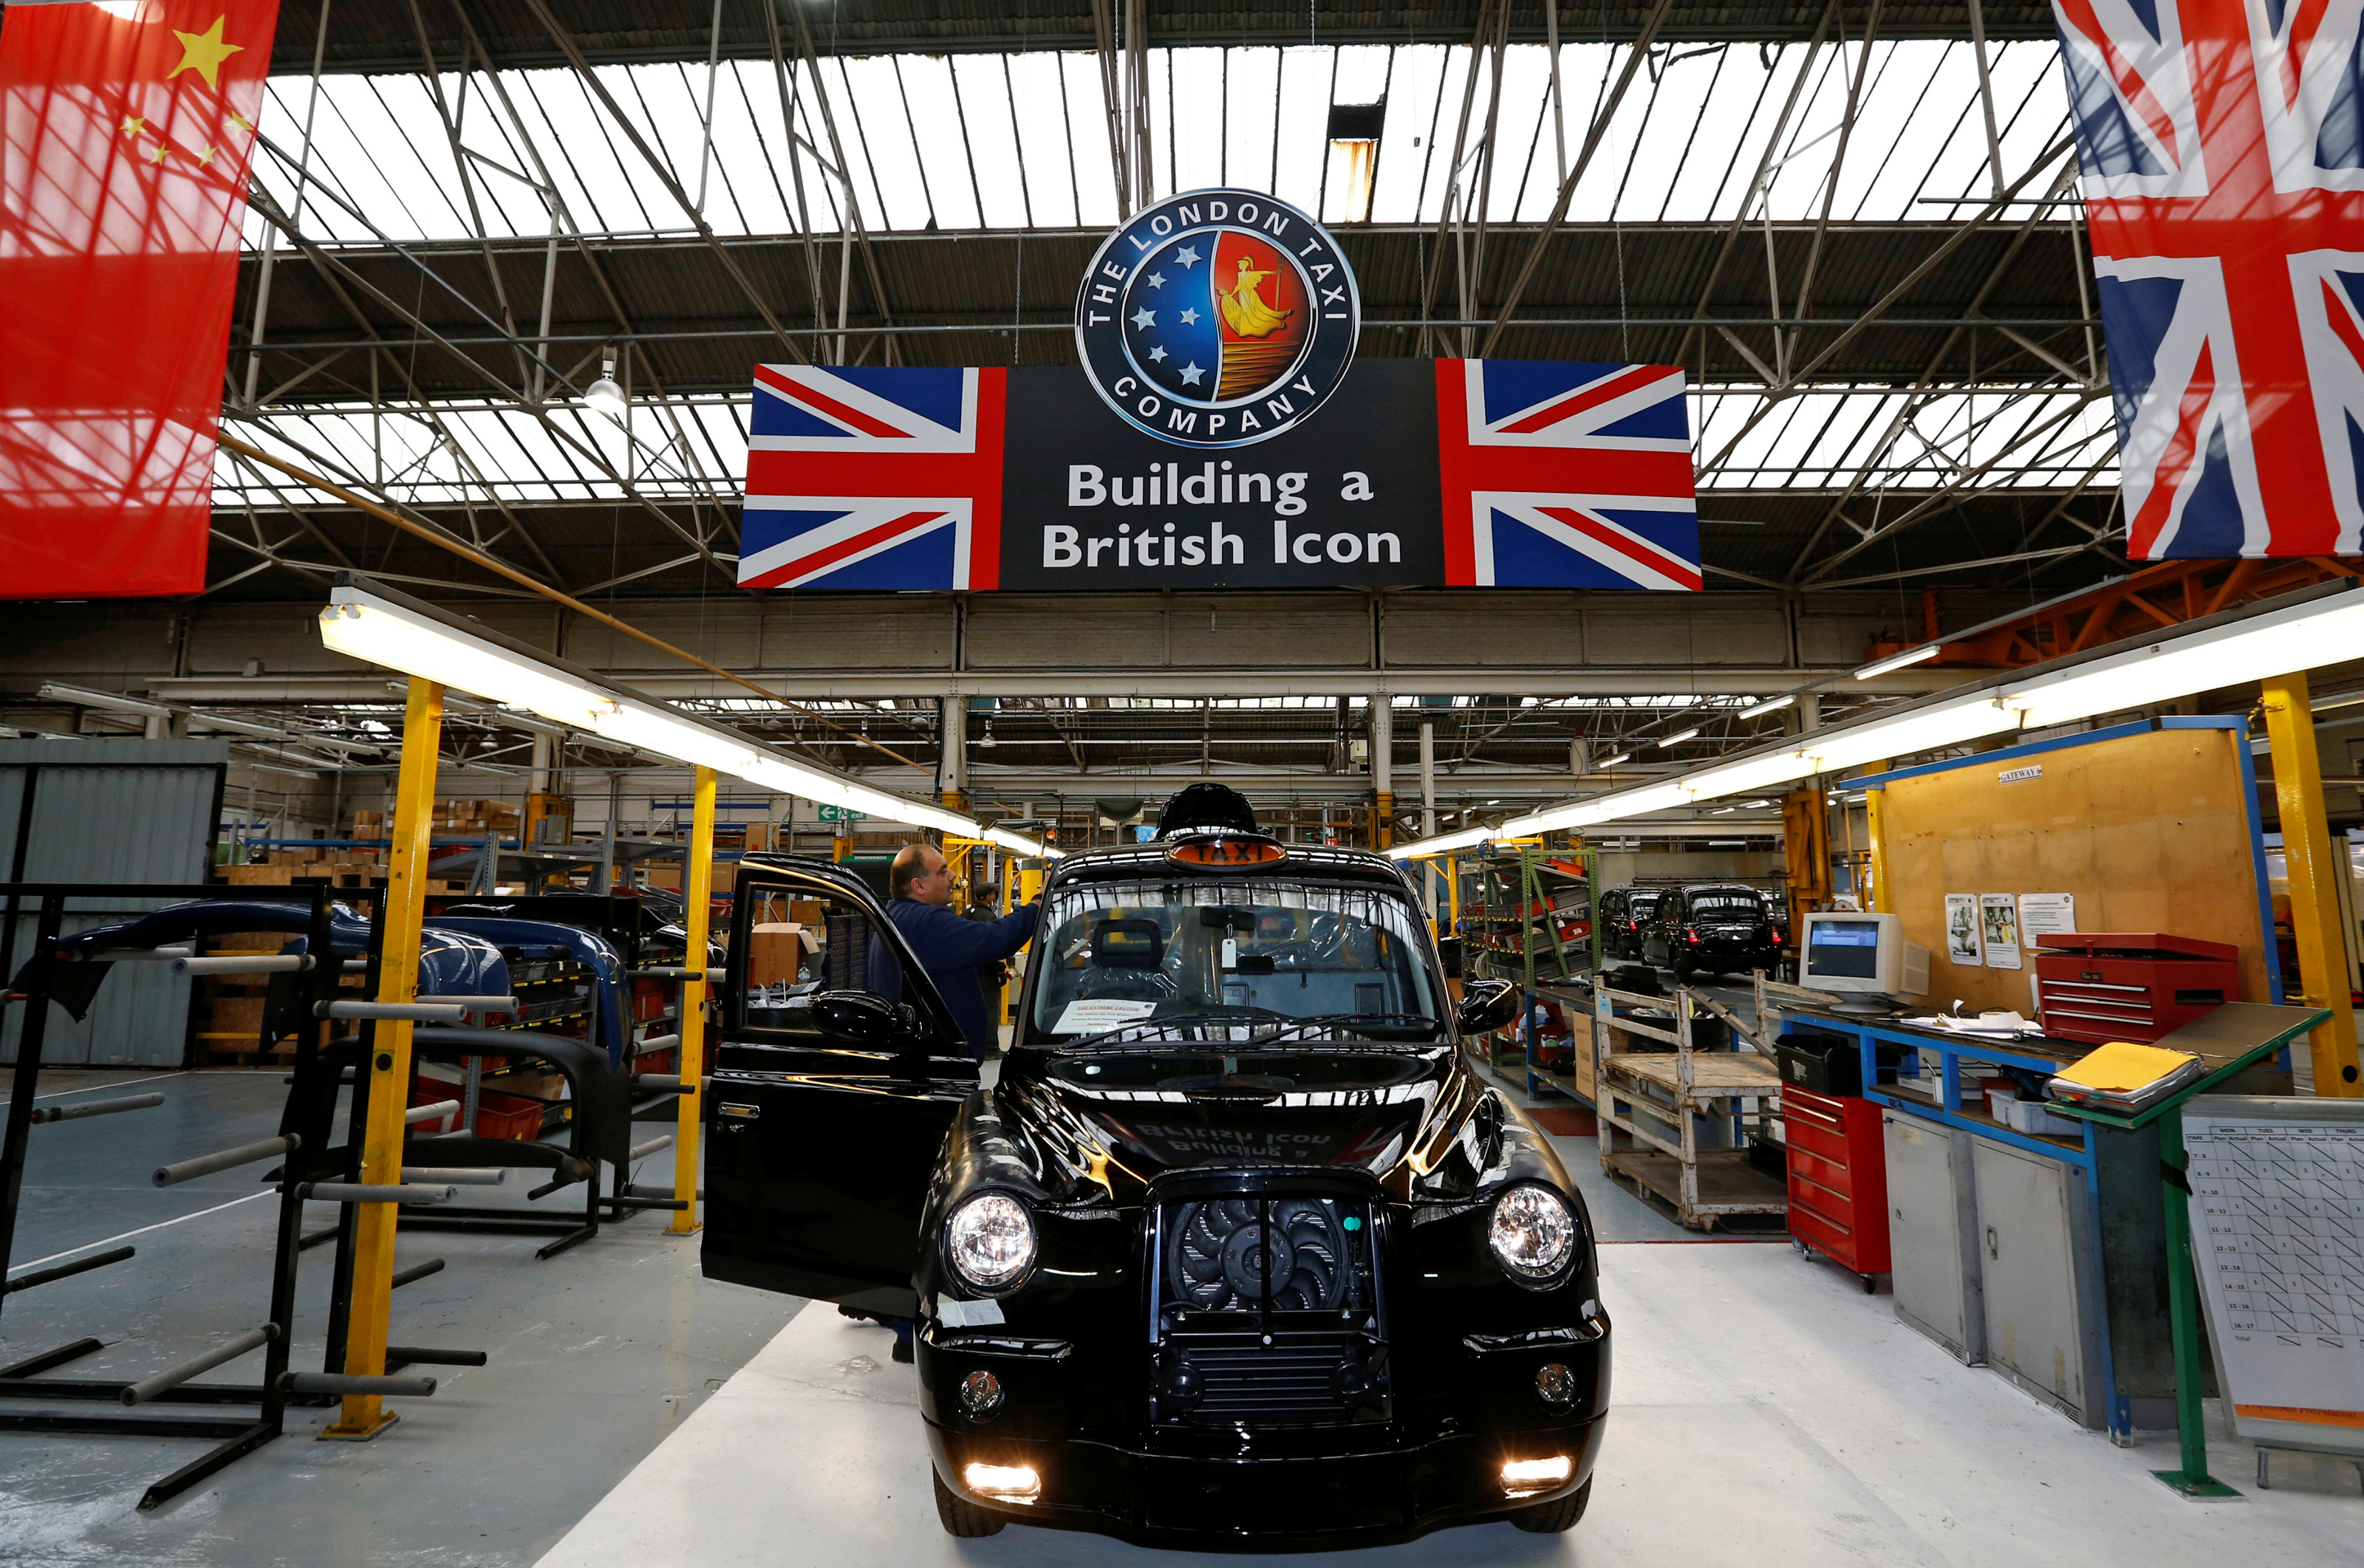 A worker checks a TX4 at the end of the production line at the London Taxi Company in Coventry